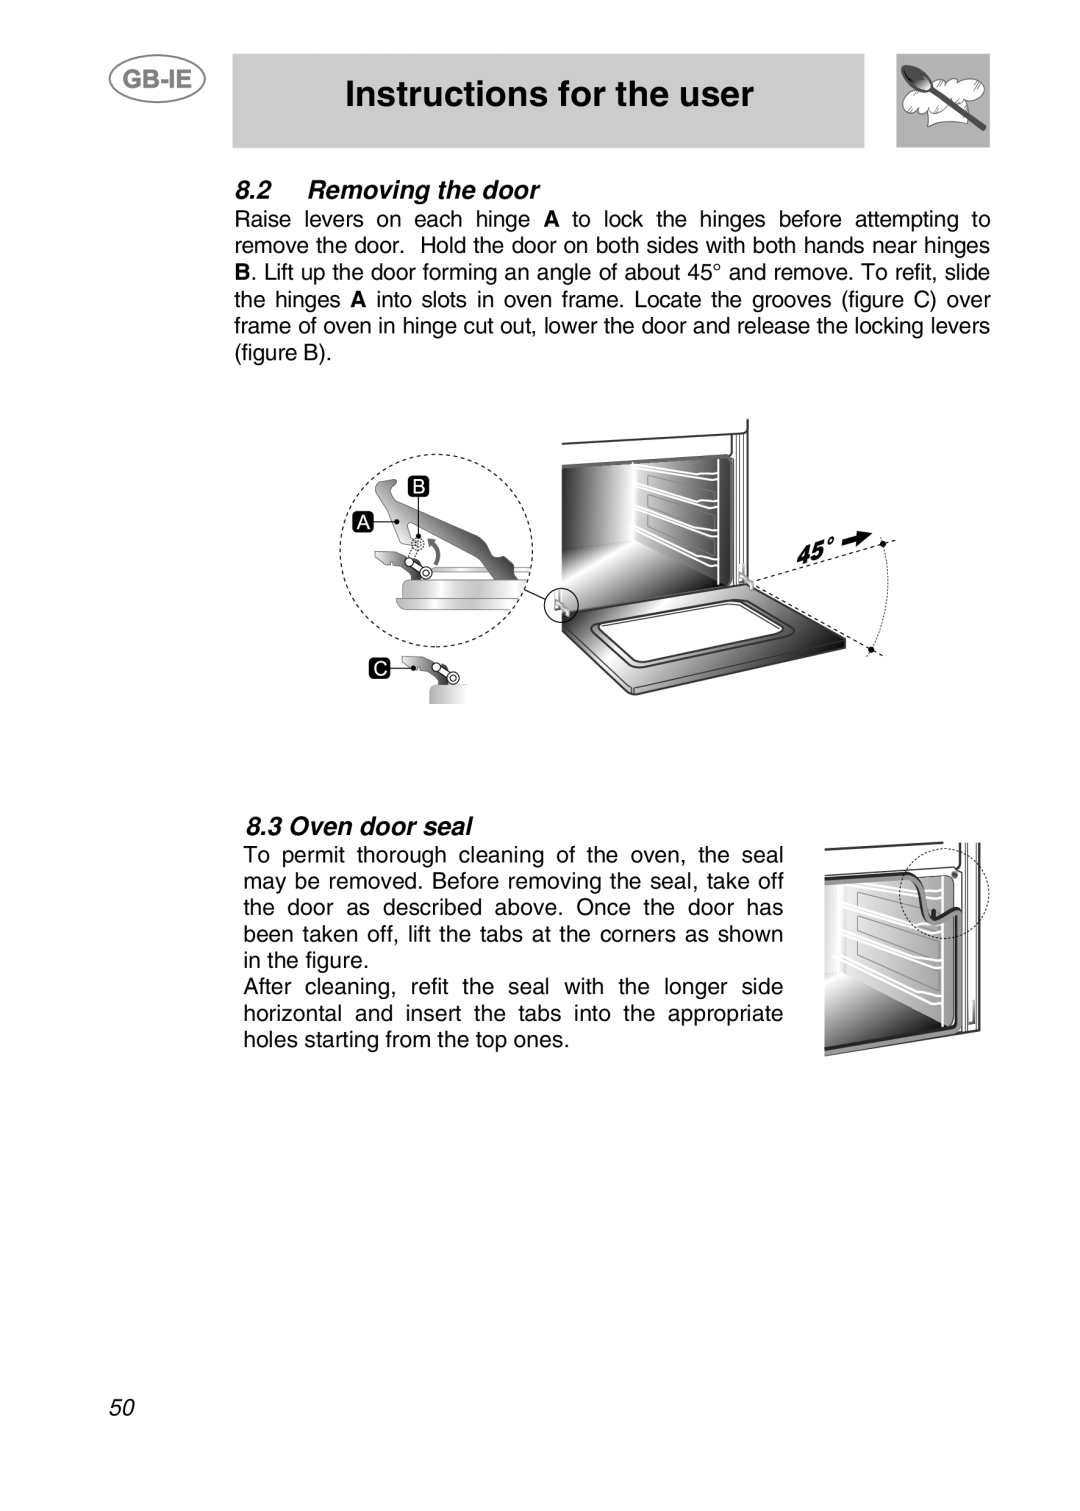 Smeg S108X-5 manual Removing the door, Oven door seal, Instructions for the user 